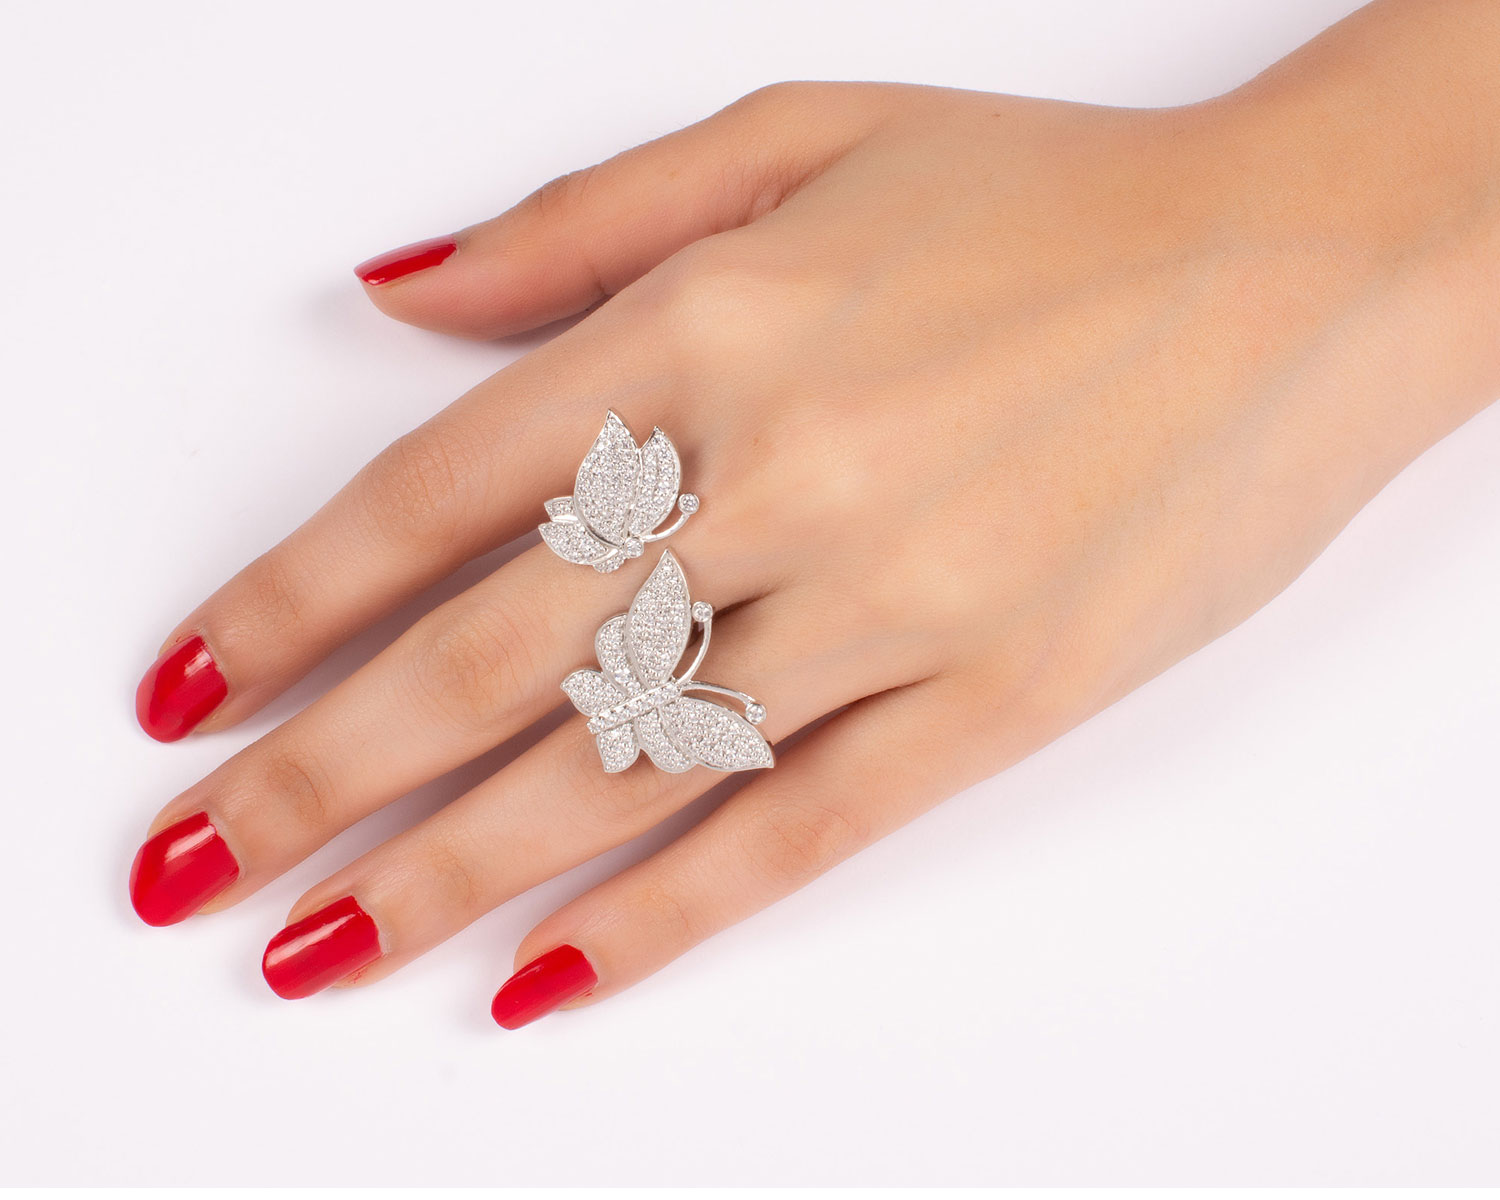 The Two Butterfly Ring